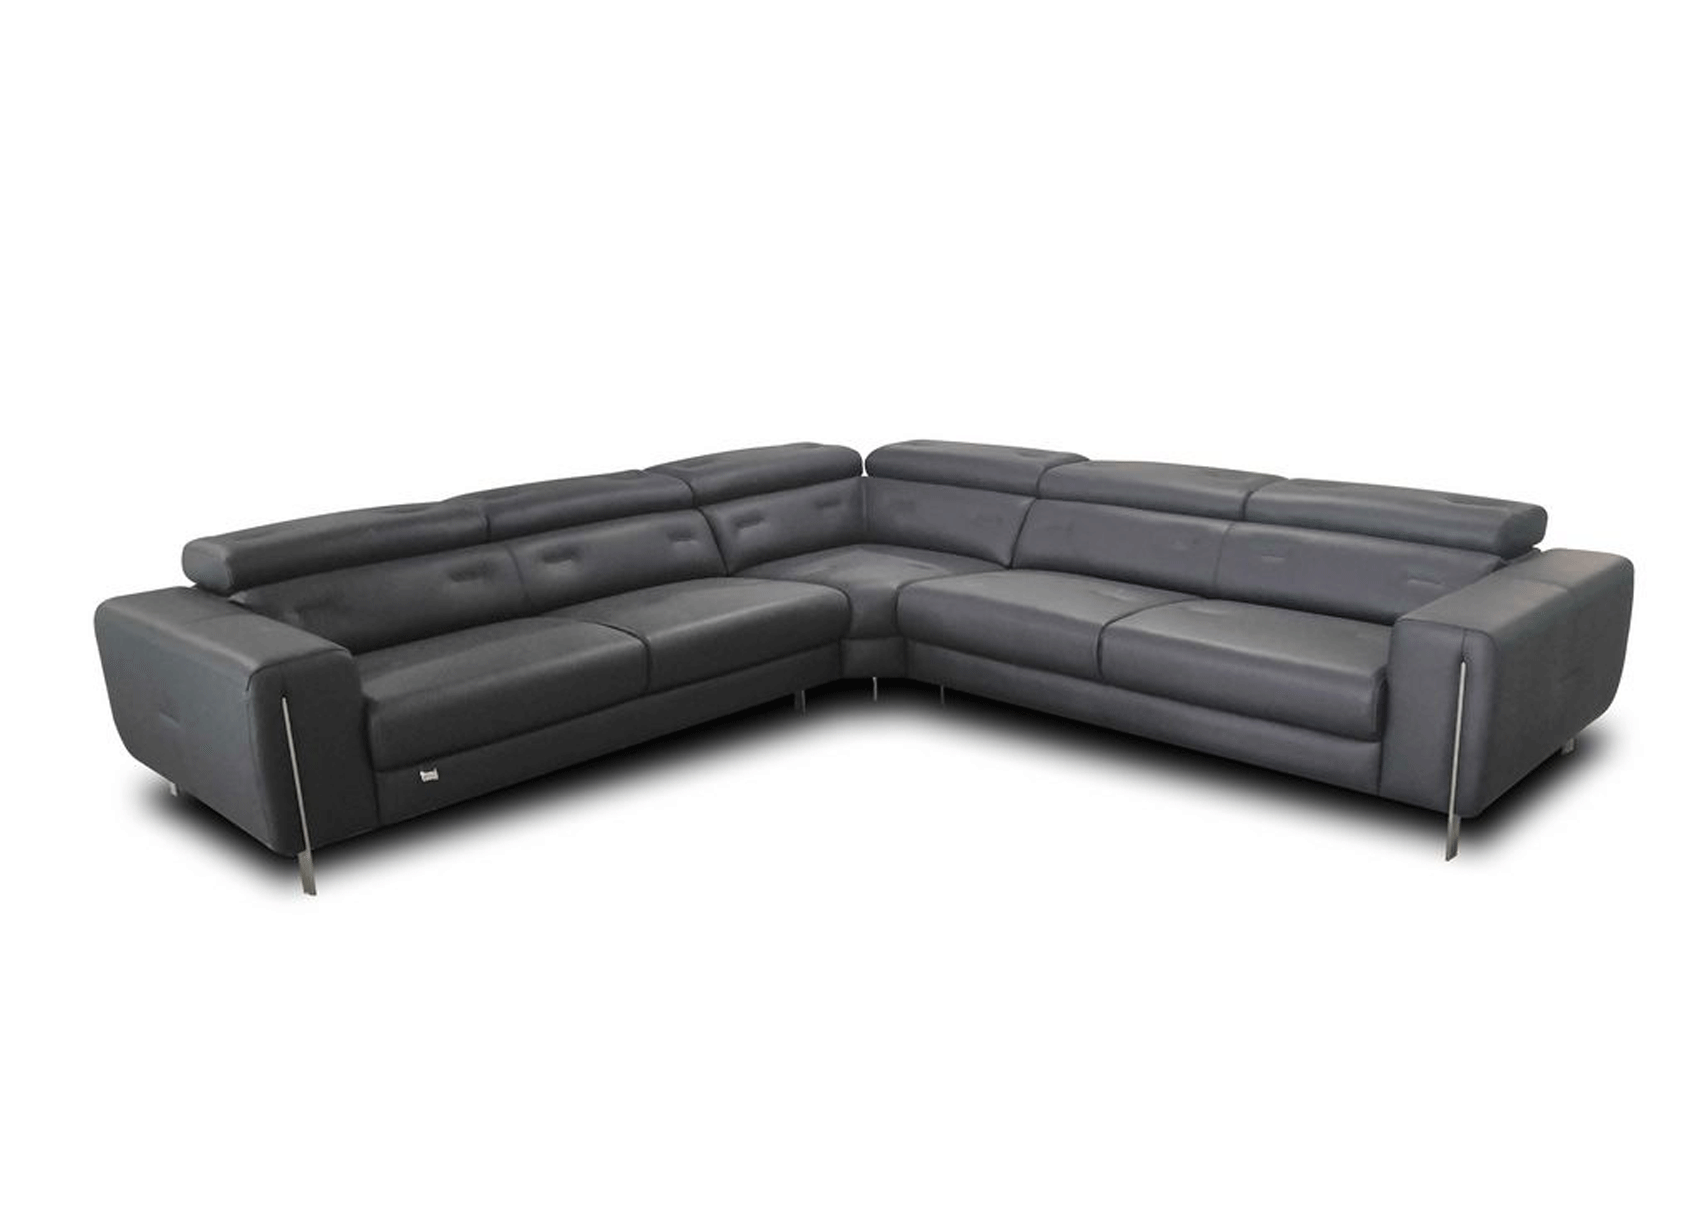 Brands Formerin Classic Living Room, Italy 795 Sectional